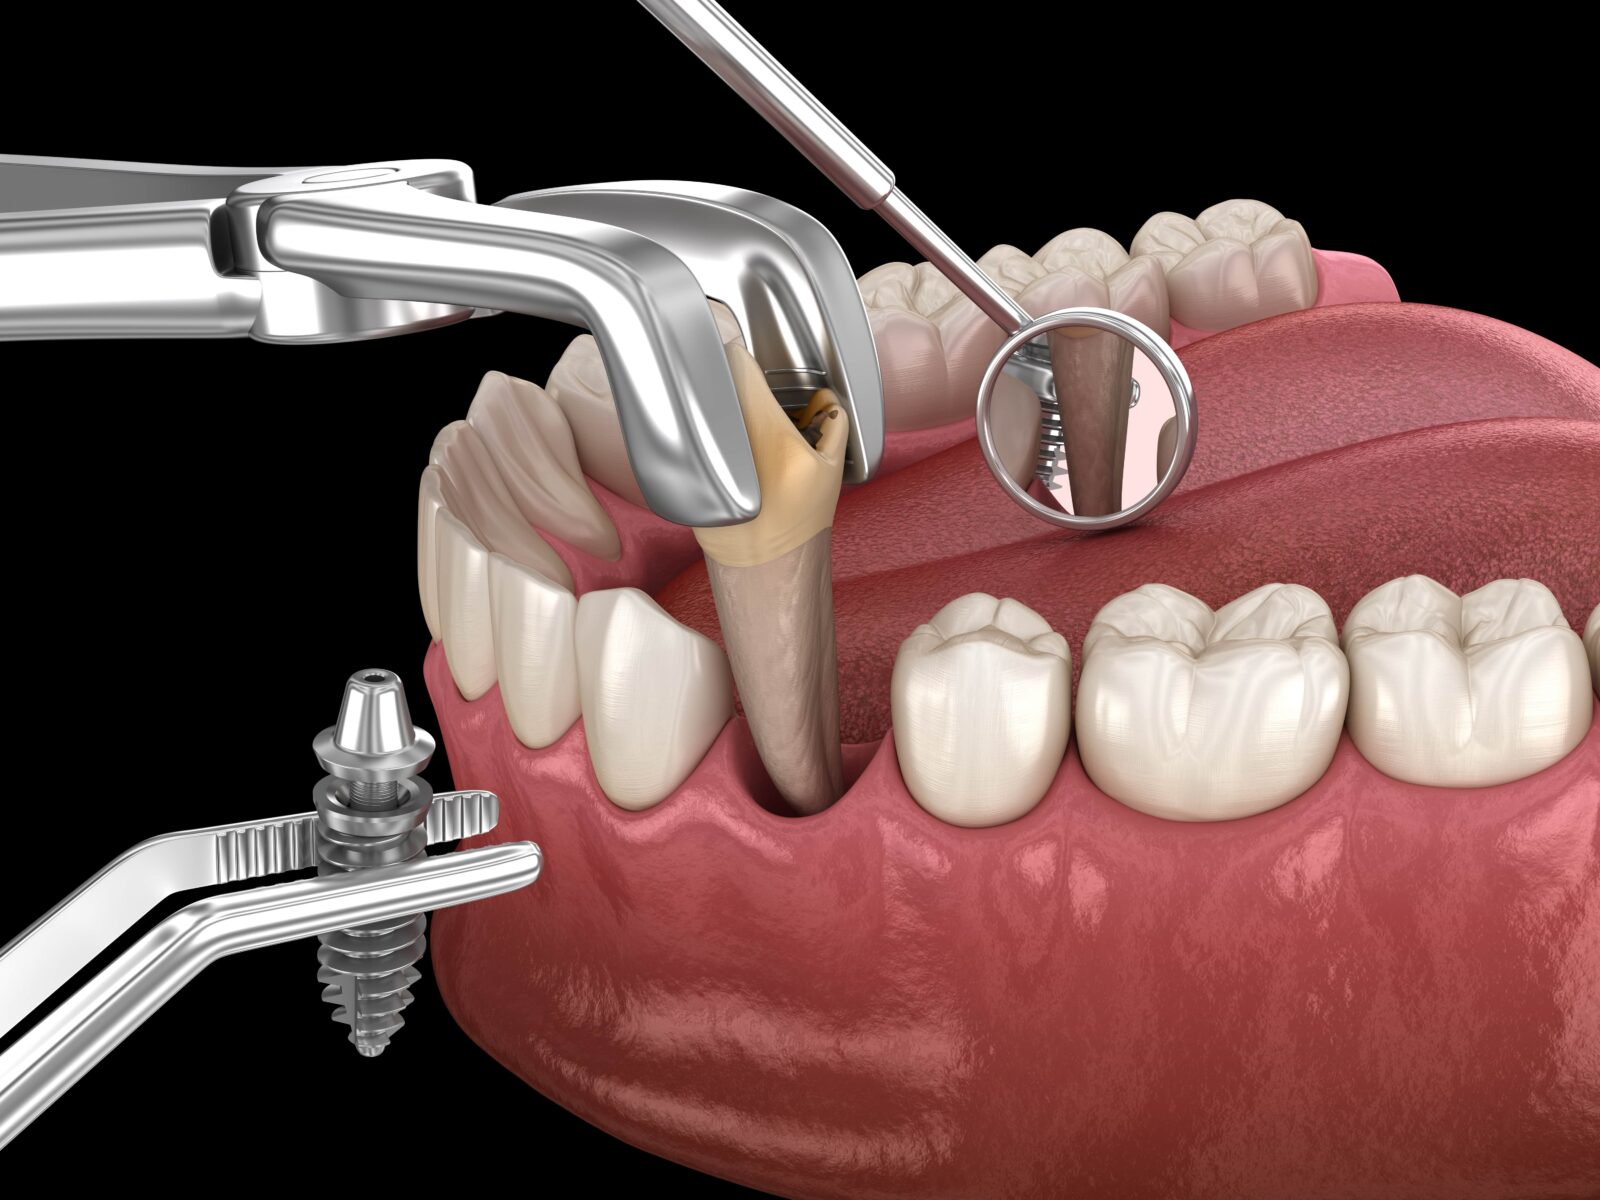 tooth extraction with dental implant replacement